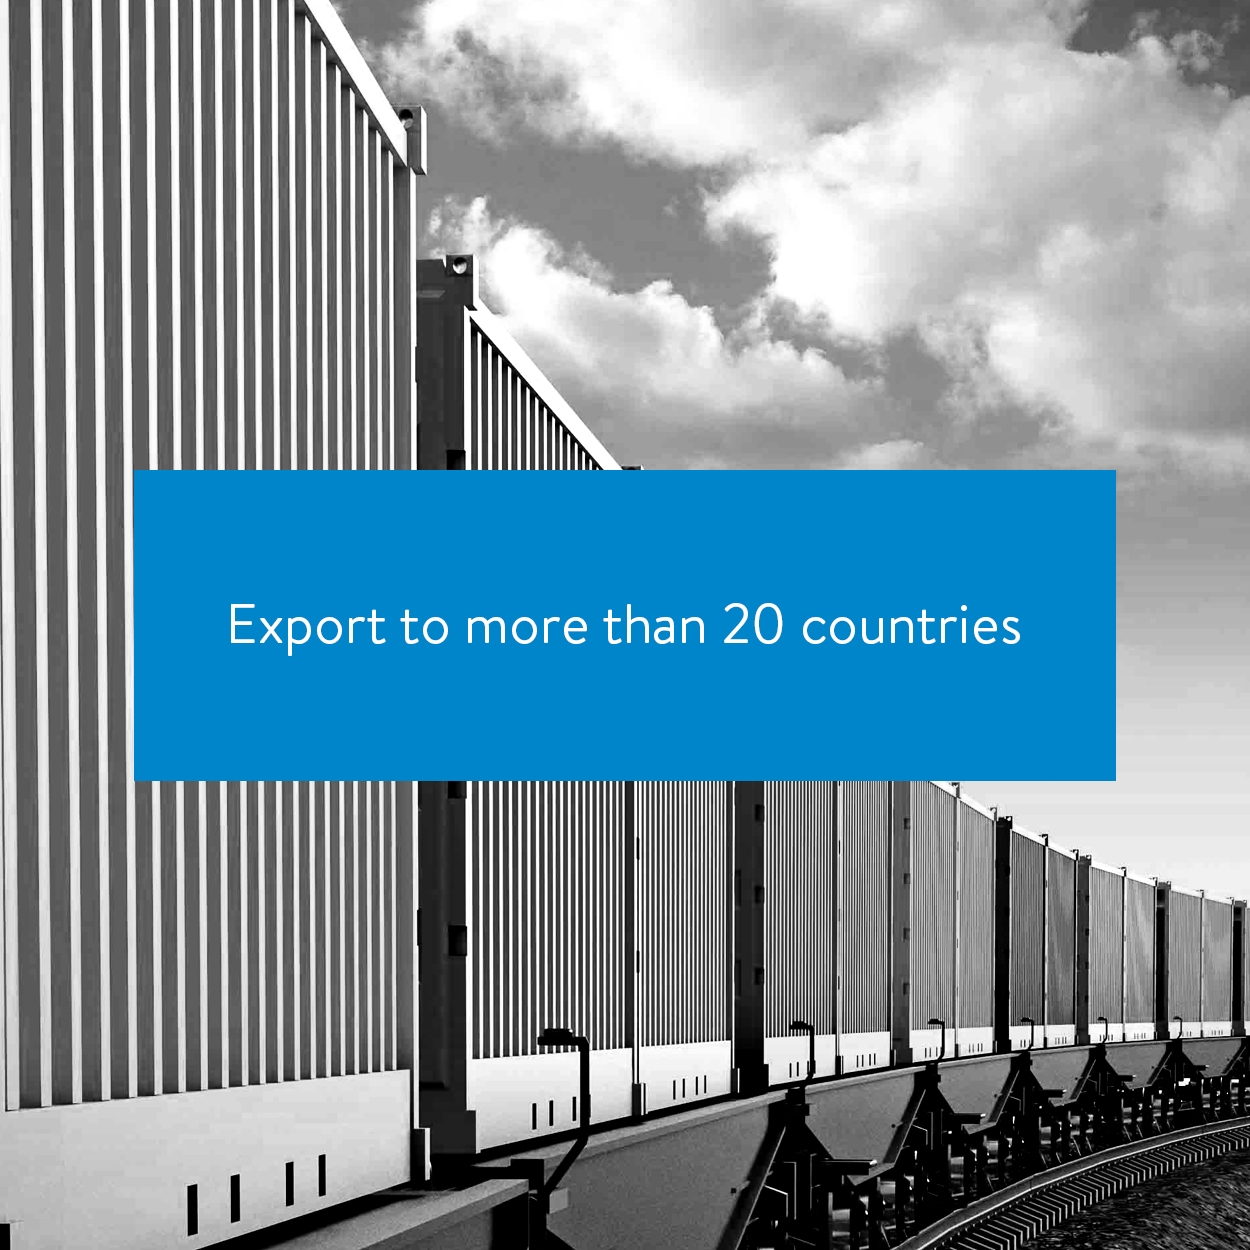 Export to more than 20 countries